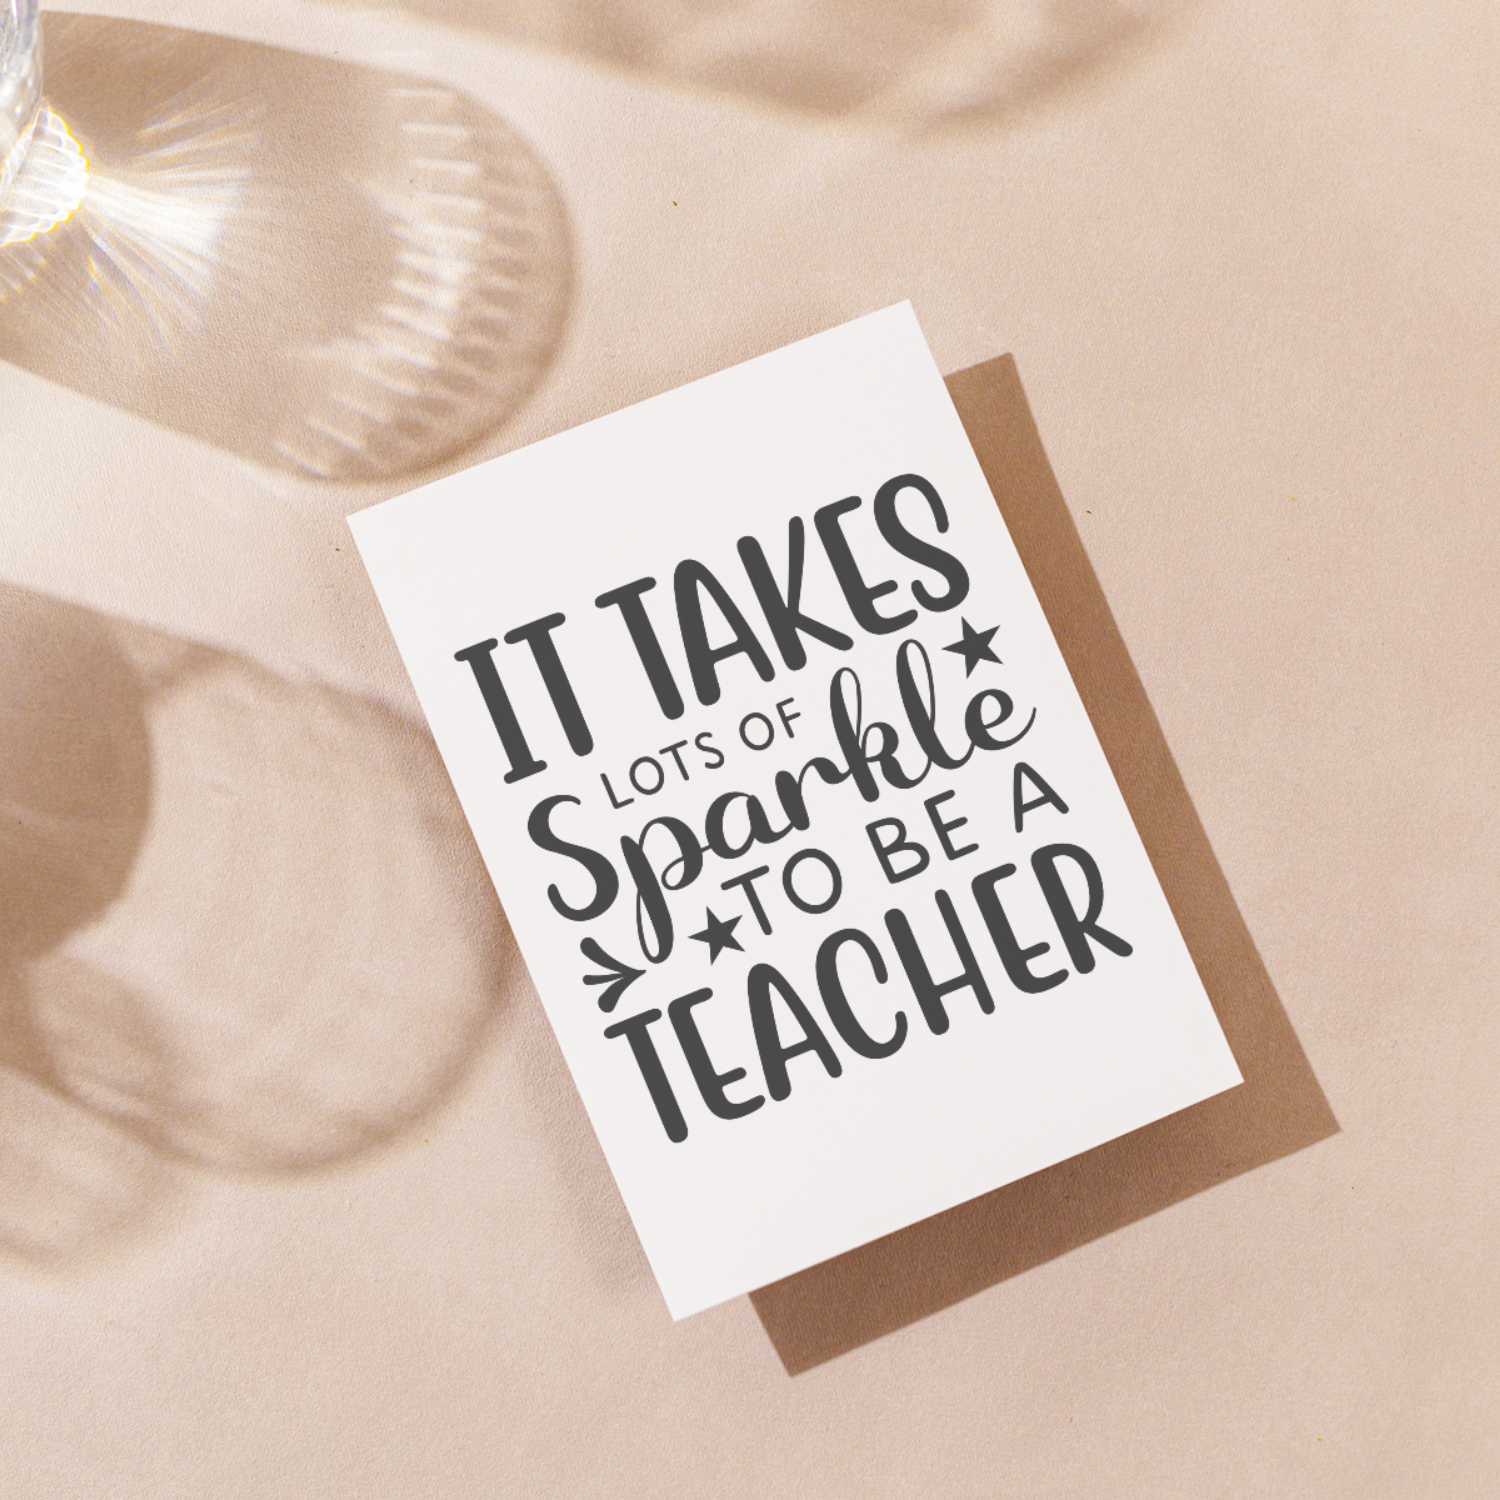 It Takes Lots of Sparkle to be a Teacher 1-01 SVG | Digital Download | Cut File | SVG - Only The Sweet Stuff